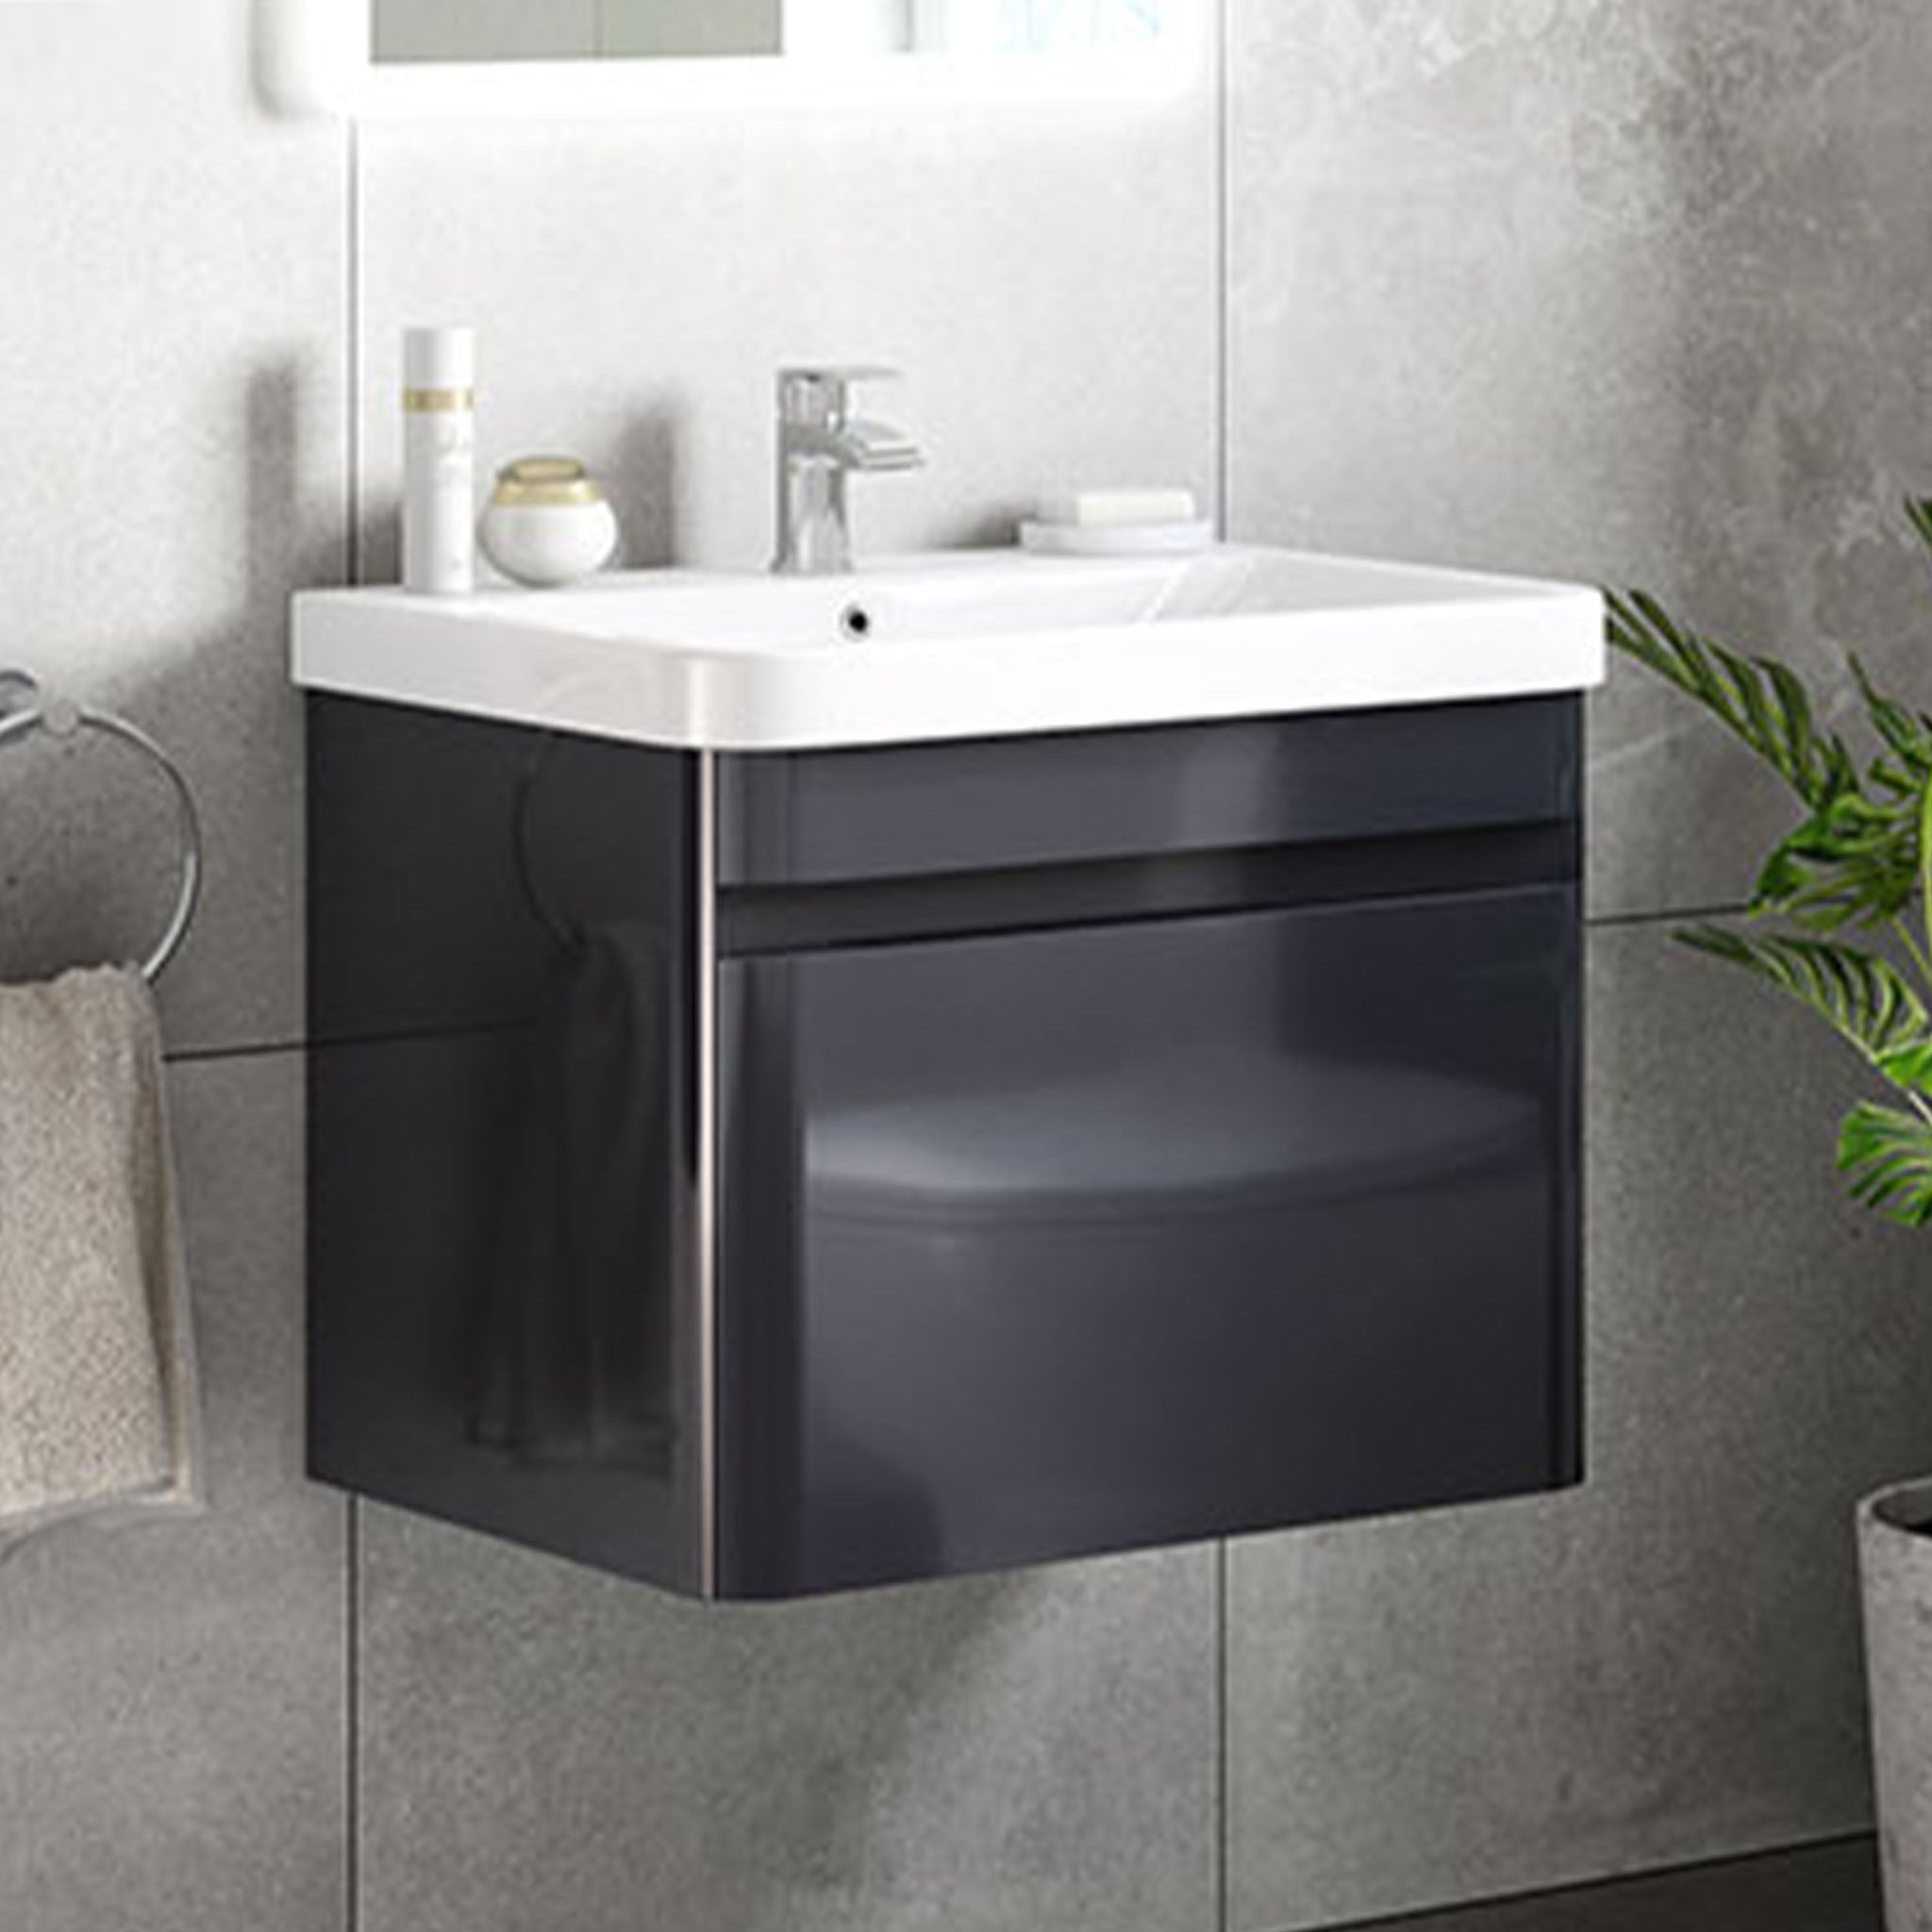 MyLife Clearance Casi 600mm 1 Drawer Wall Mounted Unit & Basin - Gloss Anthracite